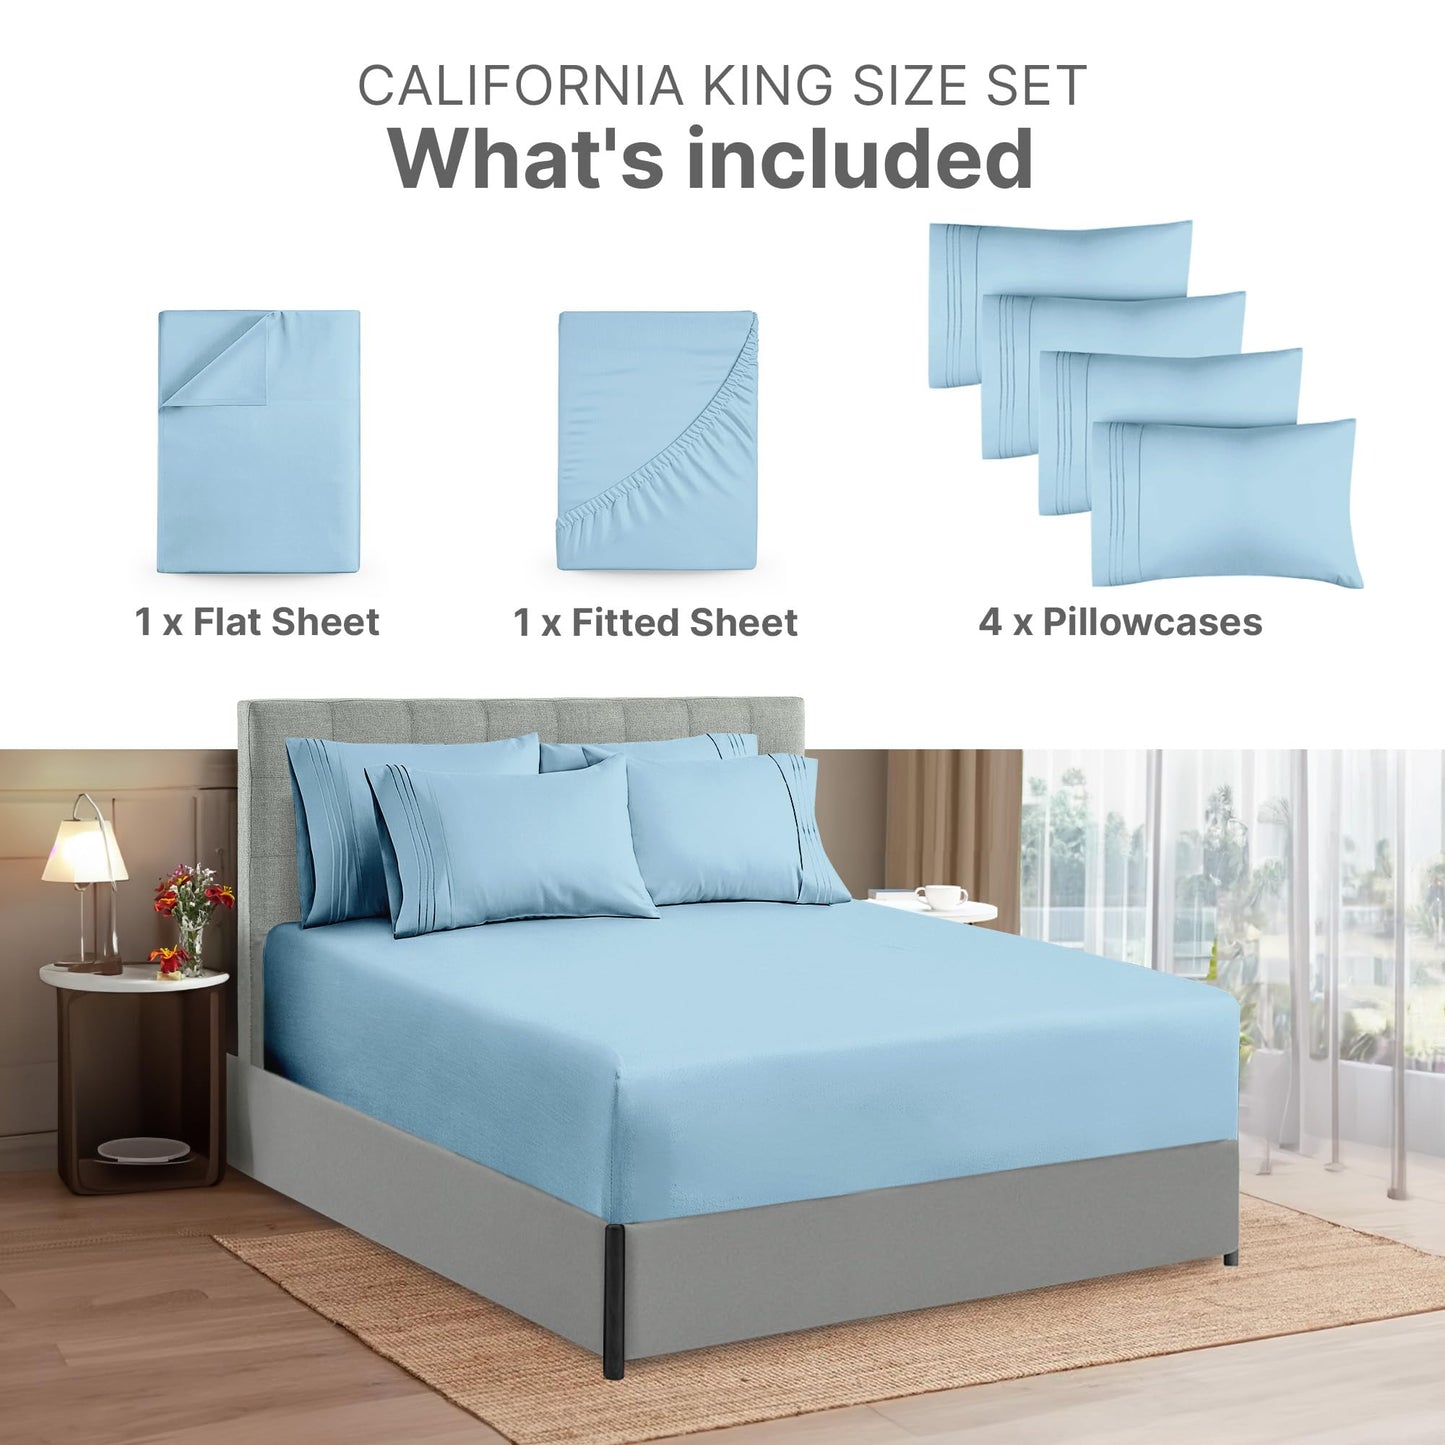 Extra Deep Cal King Sheet Set - 6 Piece Breathable & Cooling Sheets - Hotel Luxury Bed Sheets Set - Easy Fit - Soft, Wrinkle Free & Comfy Sheets Set - Light Blue Sheet Set w/Extra Deep Pockets